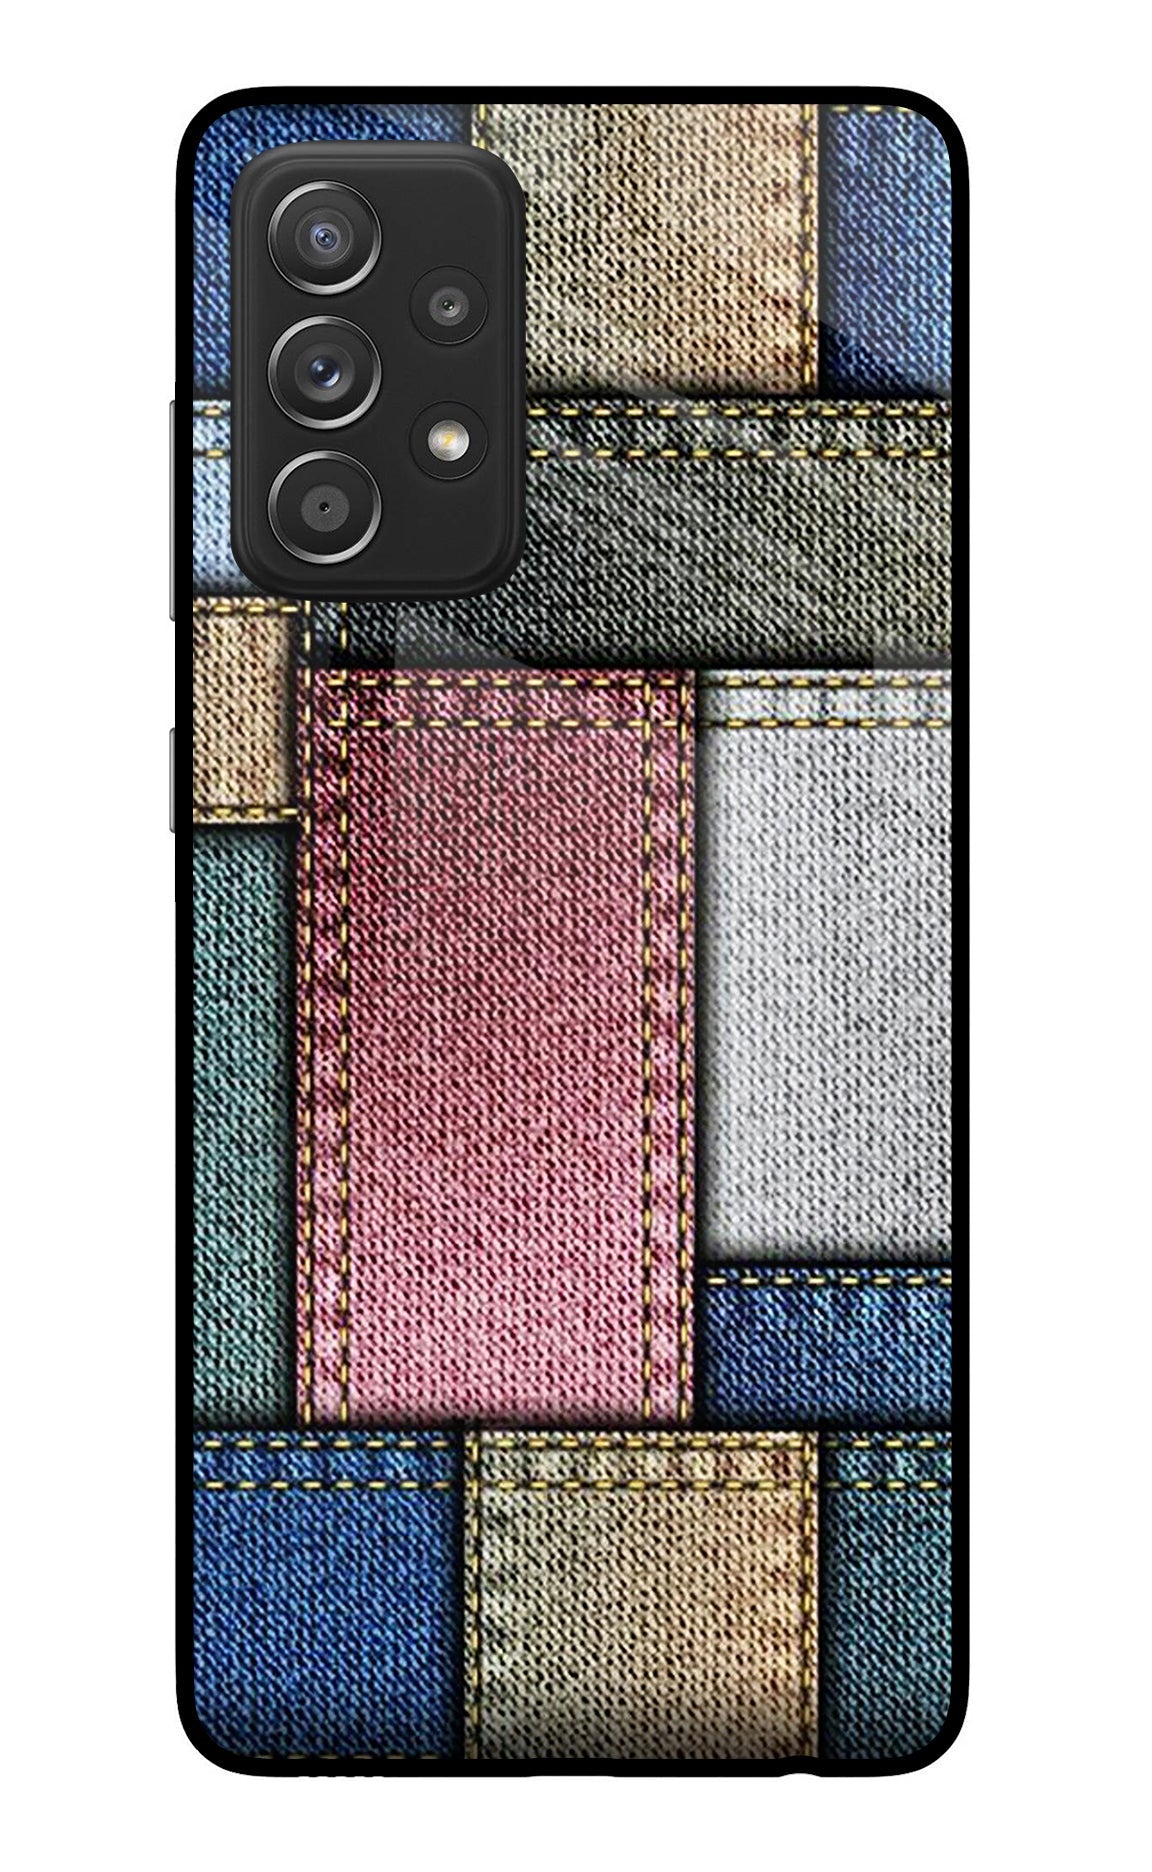 Multicolor Jeans Samsung A52/A52s 5G Back Cover